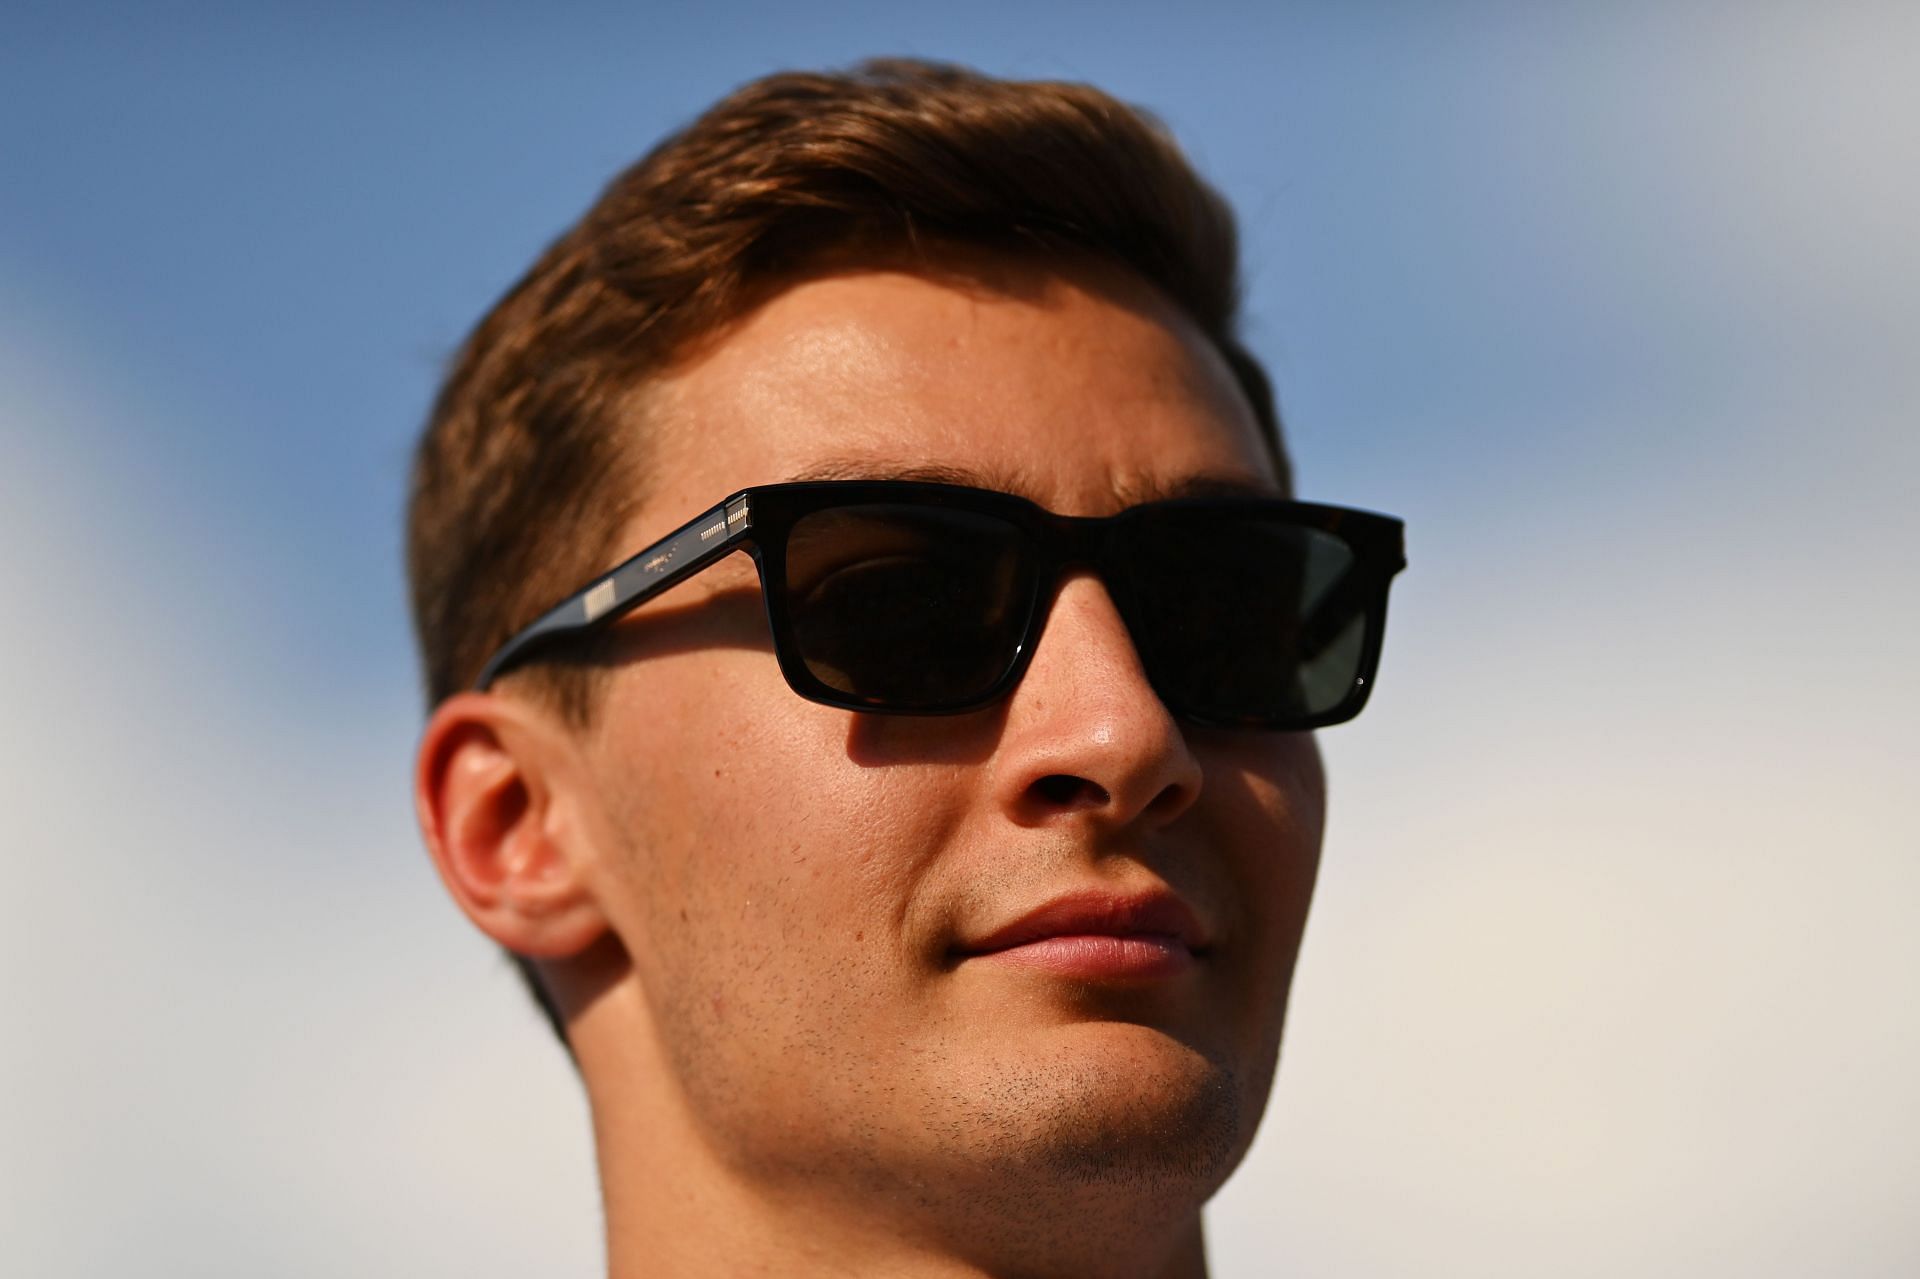 George Russell looks on in the Paddock ahead of the F1 Grand Prix of Hungary. (Photo by Dan Mullan/Getty Images)